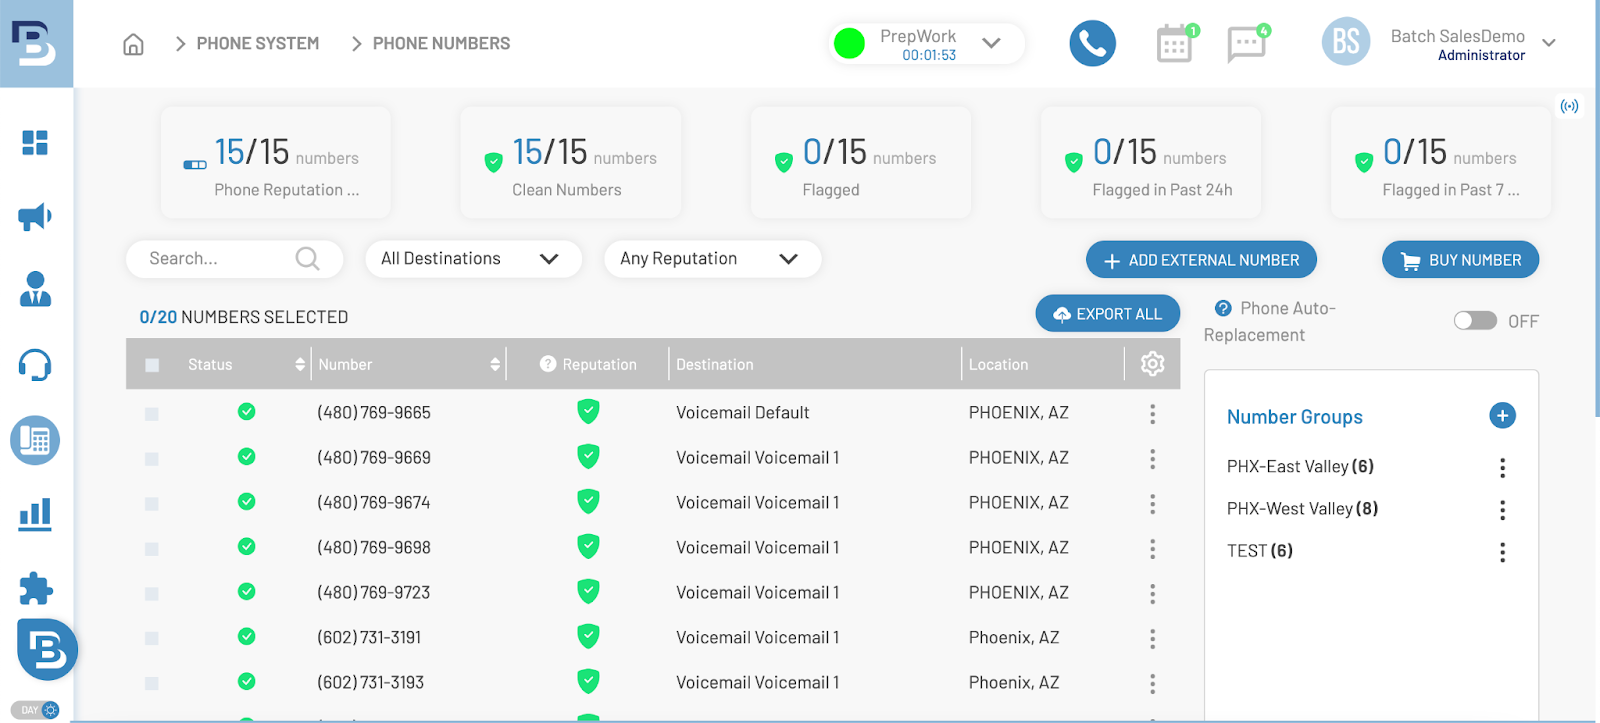 BatchDialer’s phone reputation monitoring tool tracks the status of your numbers and can automatically replace at-risk numbers free of charge.